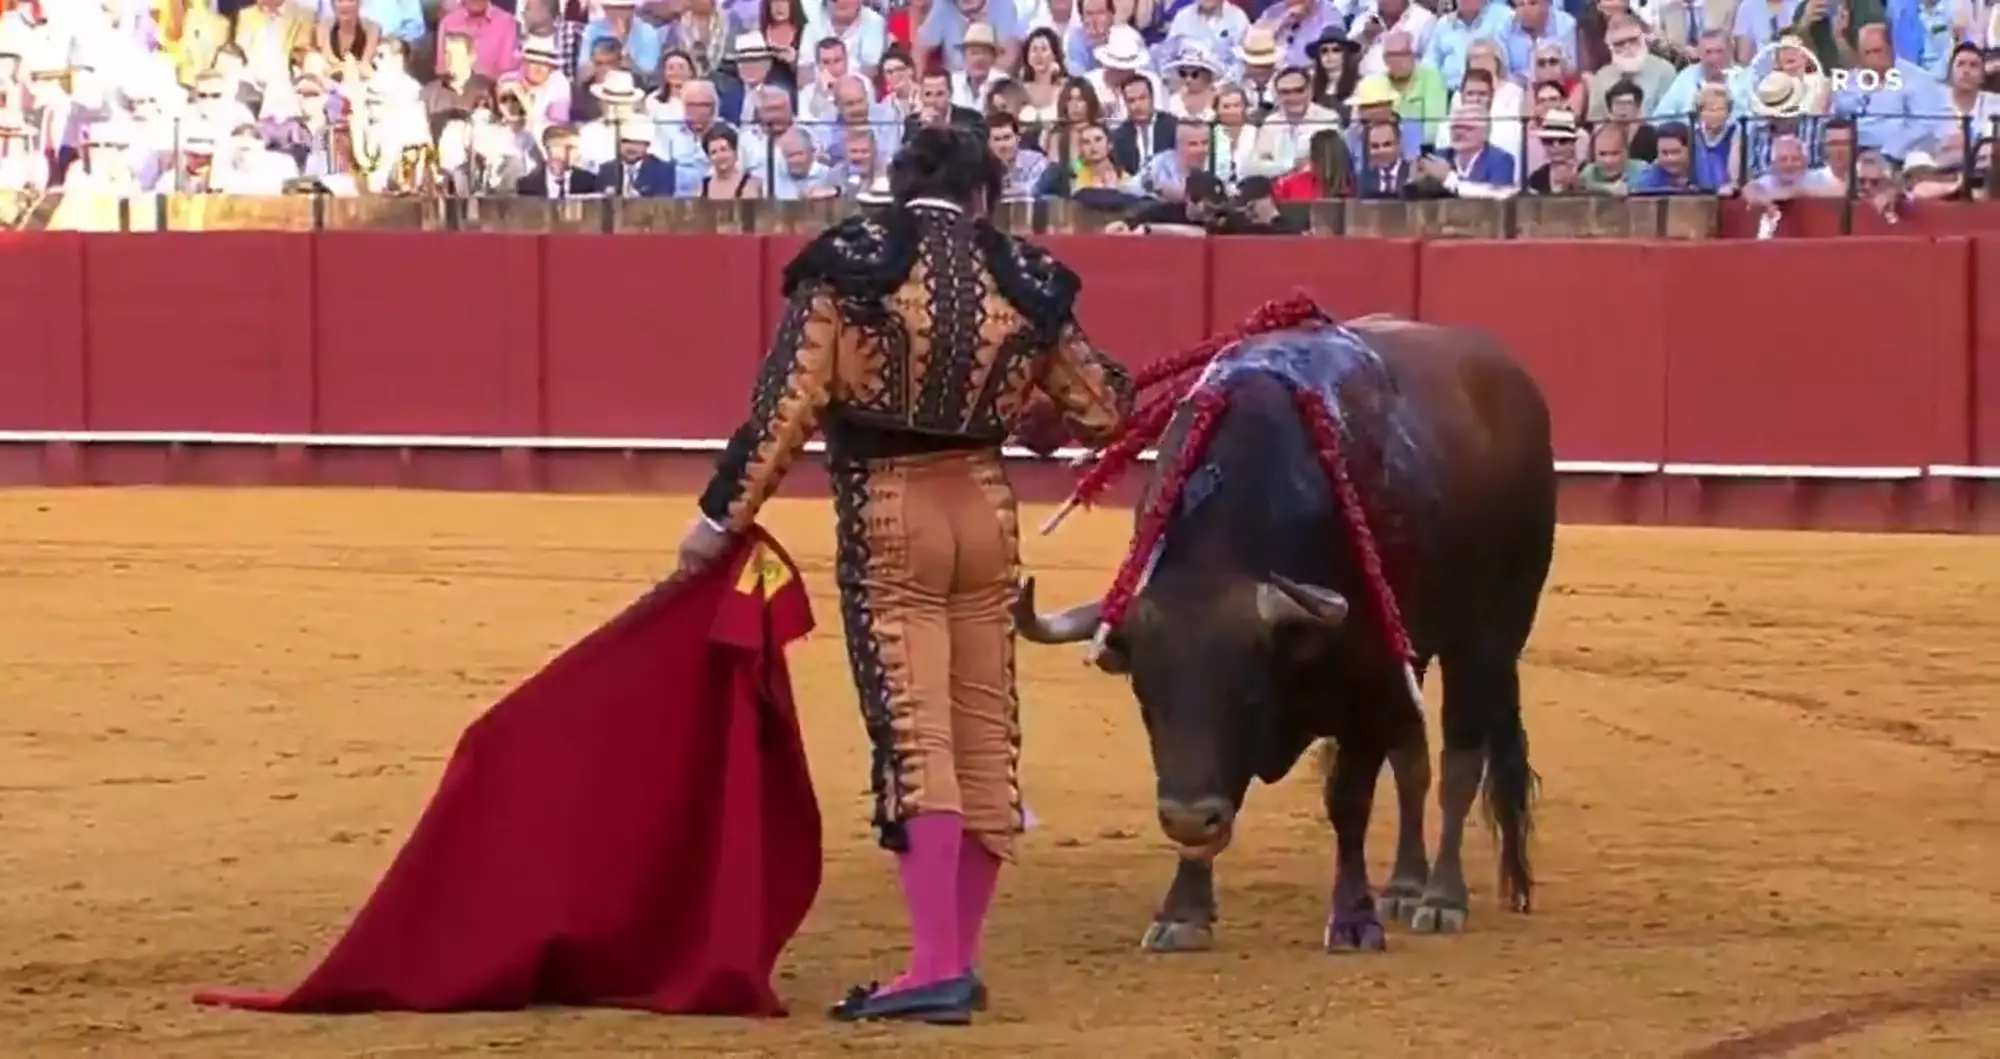 The matador has come in from criticism from animal-lovers.